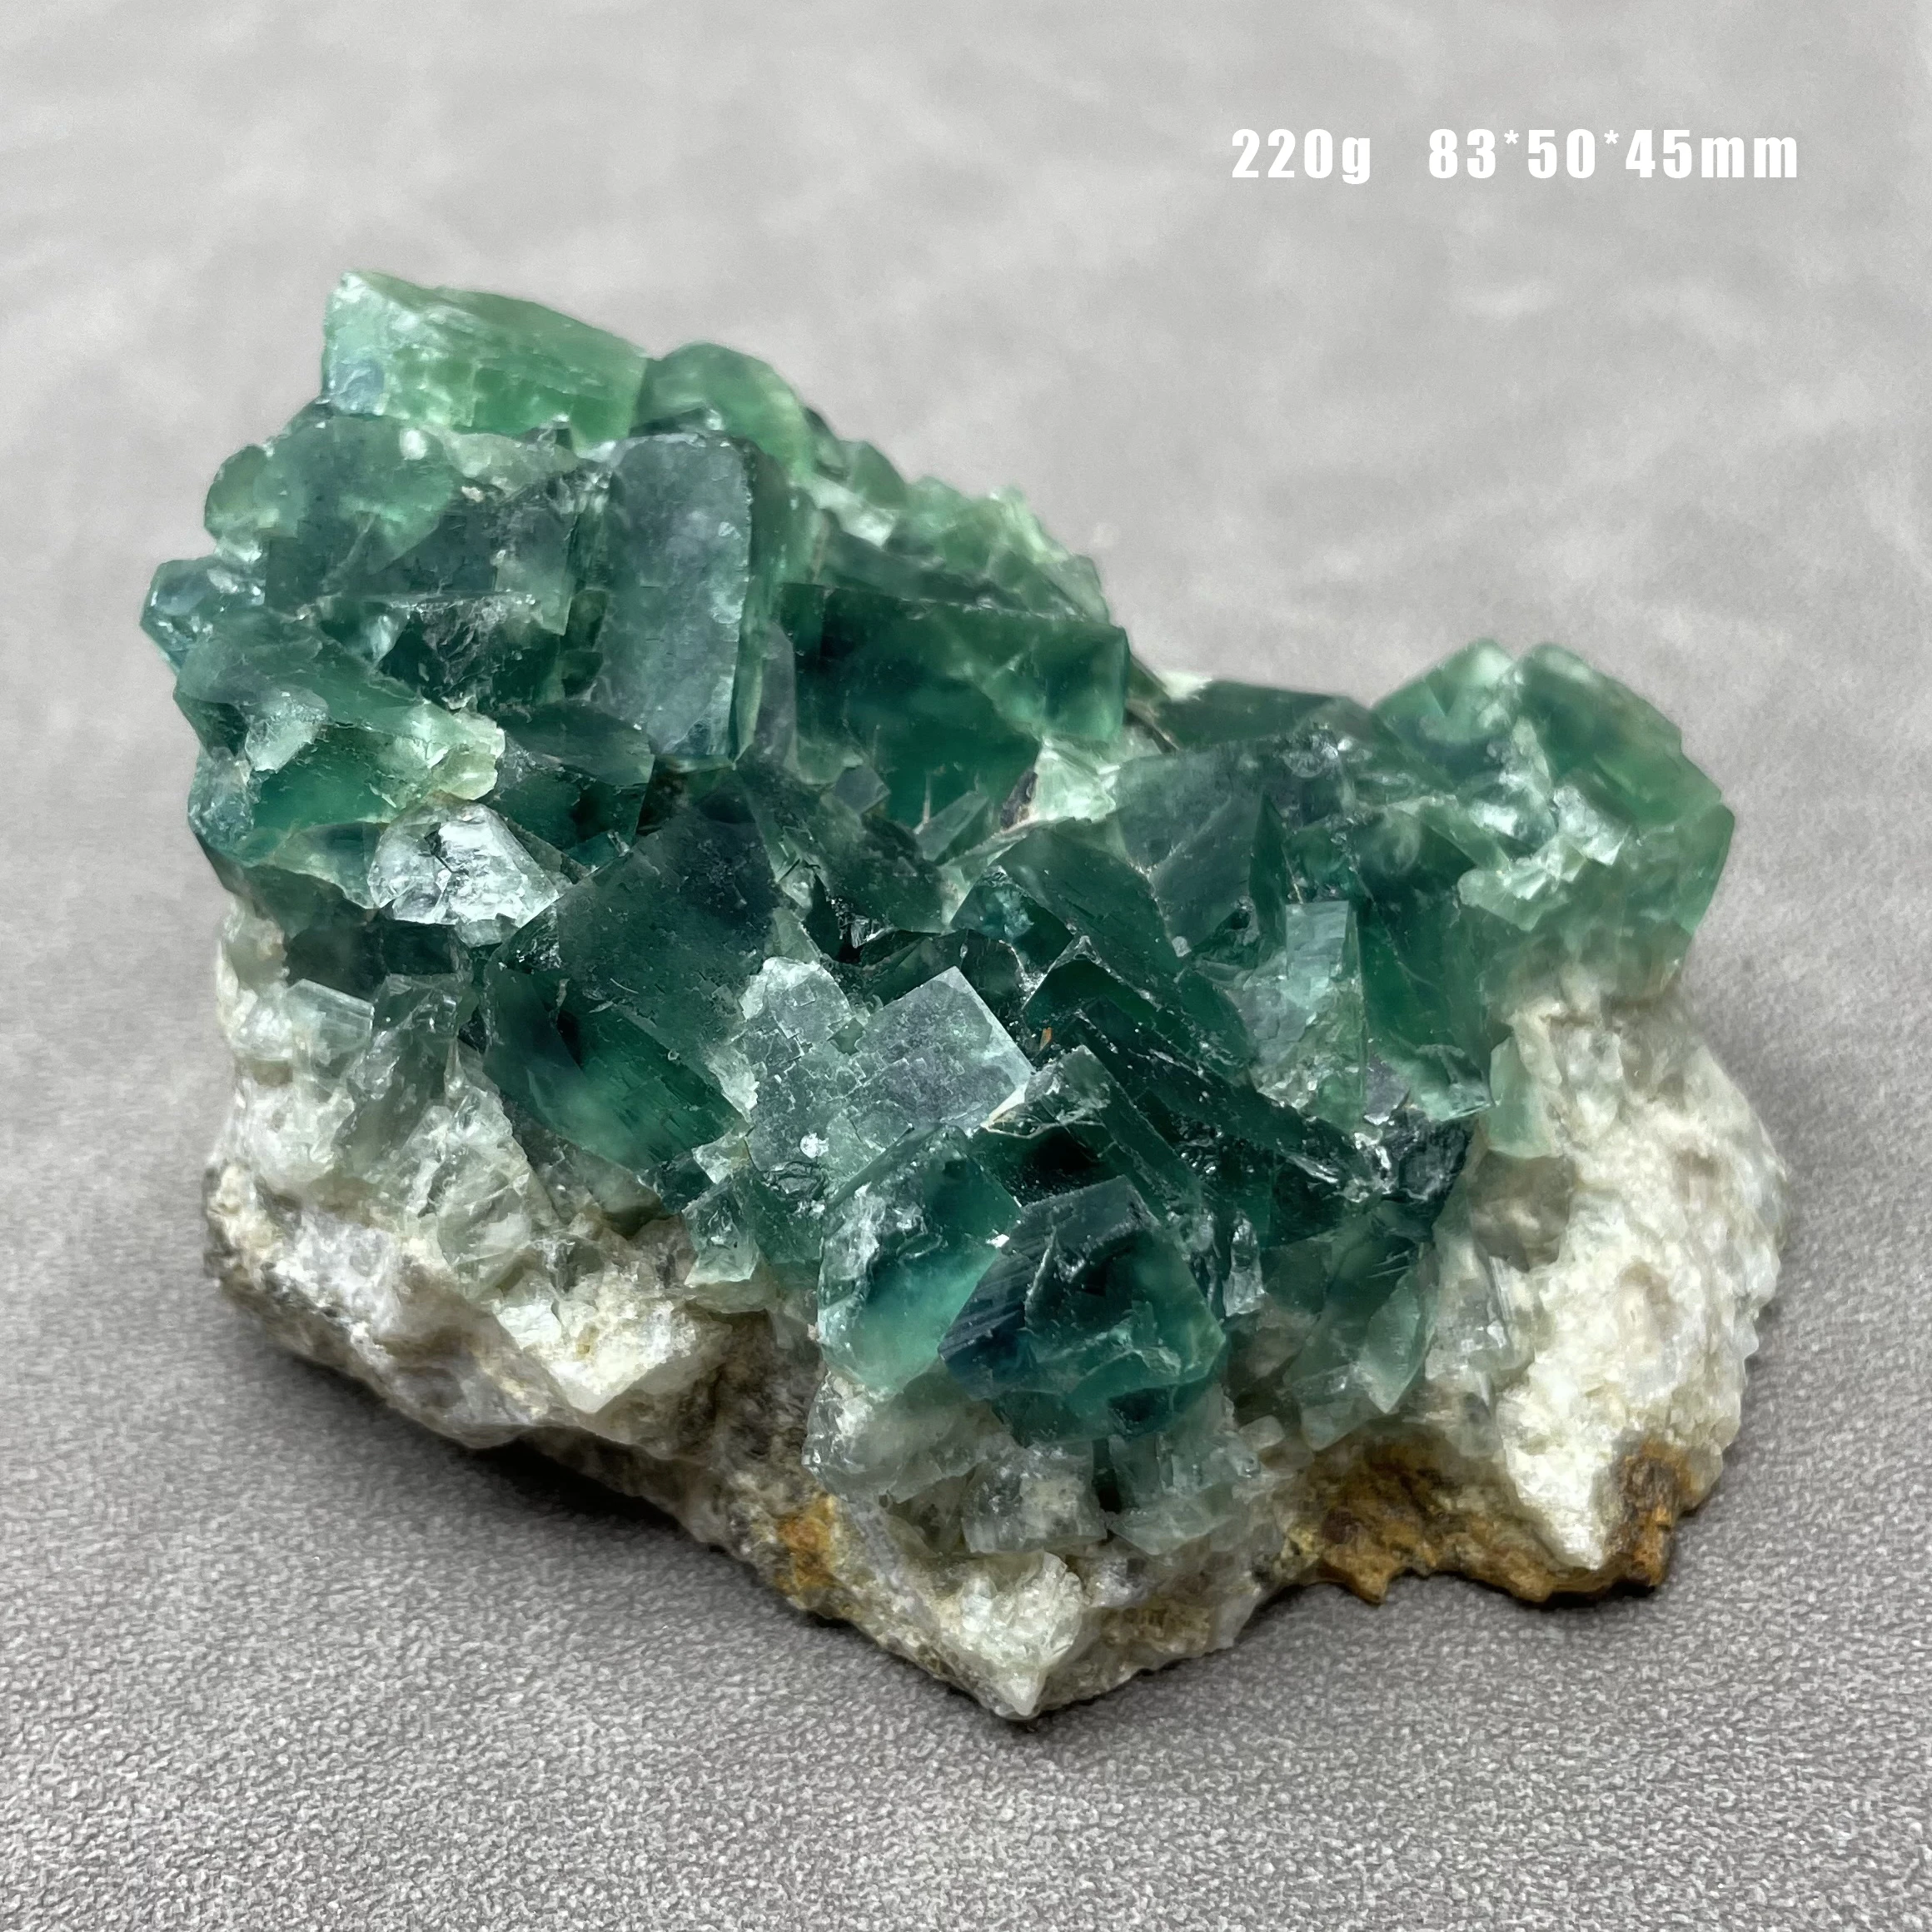 

100% Natural Green Fluorite Mineral Specimen Cluster Stones And Crystal Health Energy Healing Stone Decoration